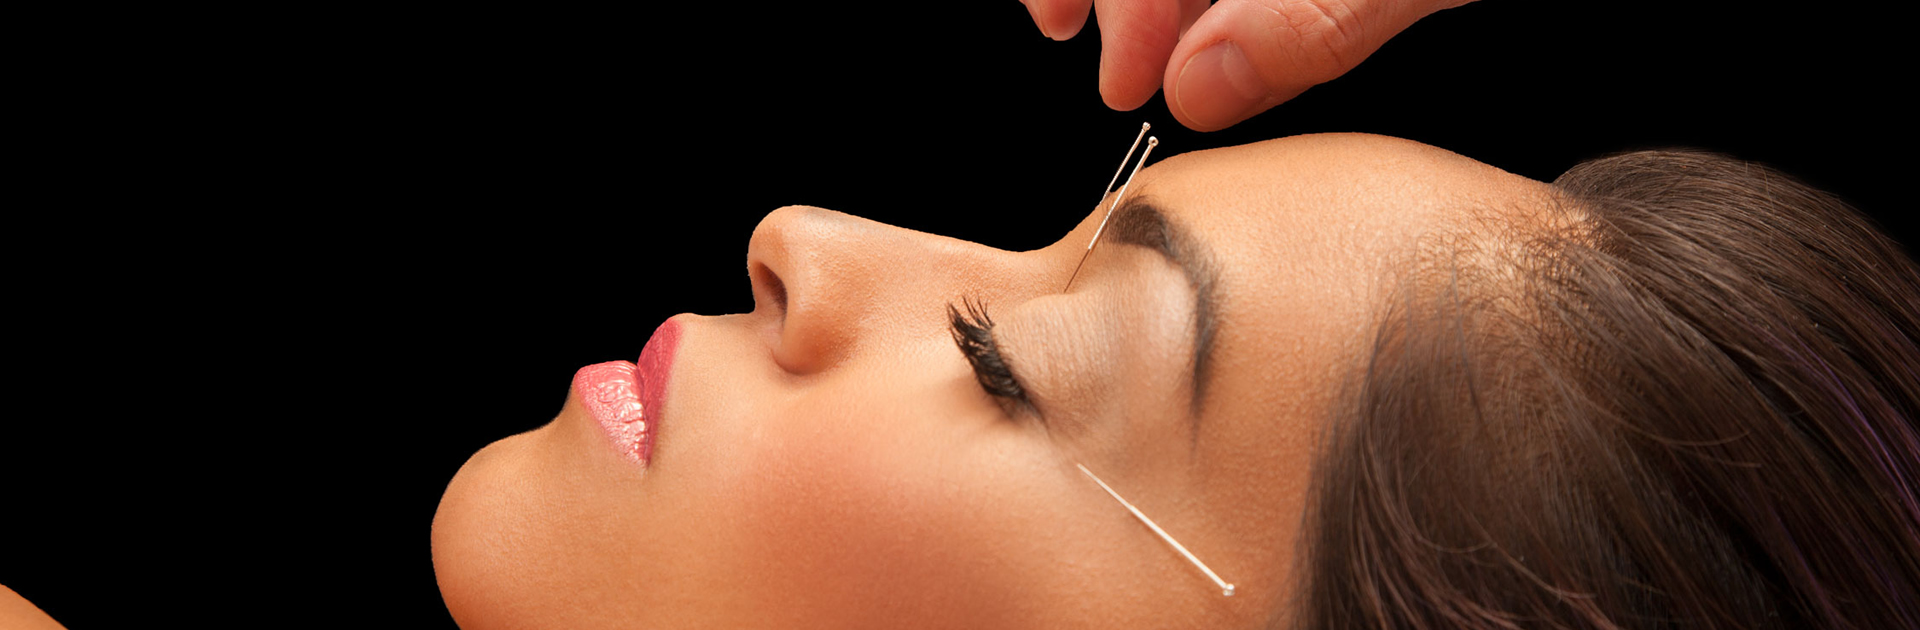 Face & Neck Rejuvenation from Gabrielle Zlotnik & The Dao Acupuncture